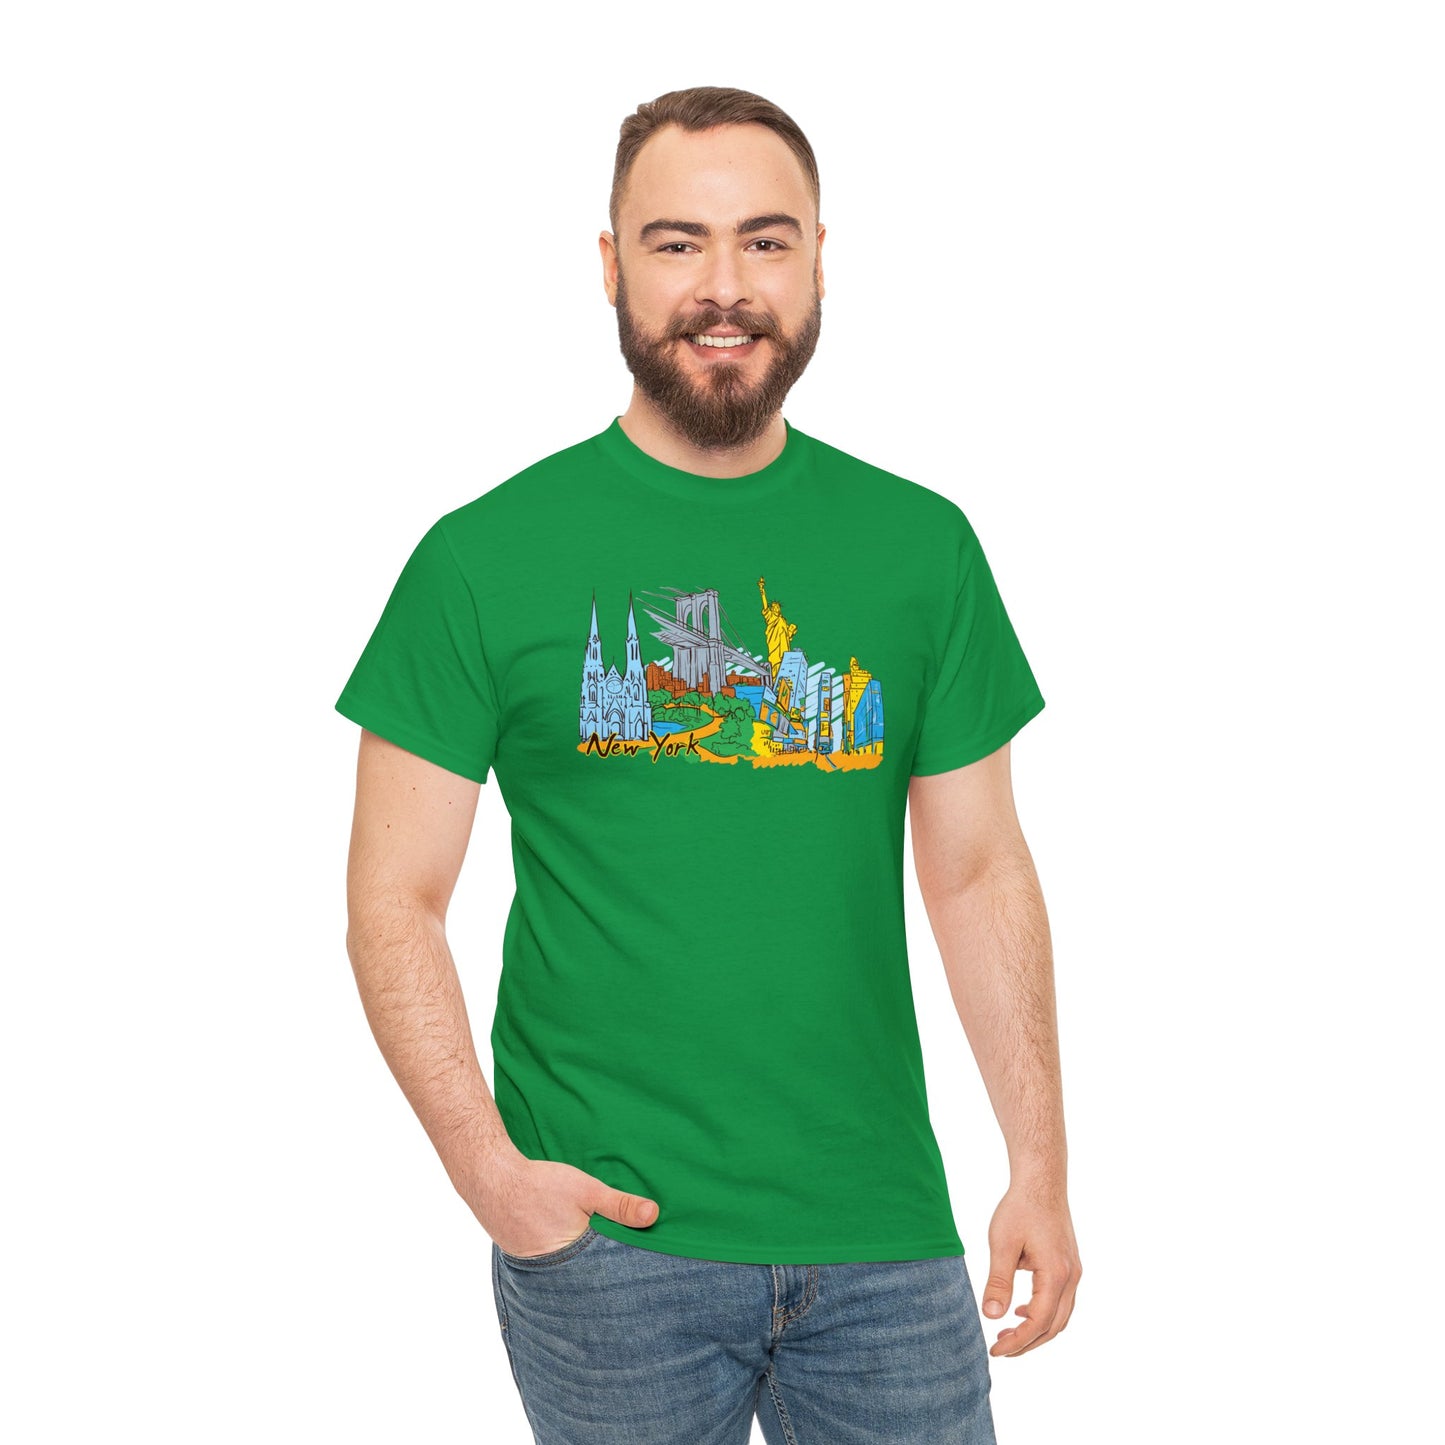 Exclusive New York City T-Shirt - A Perfect Blend of Comfort and Urban Chic!